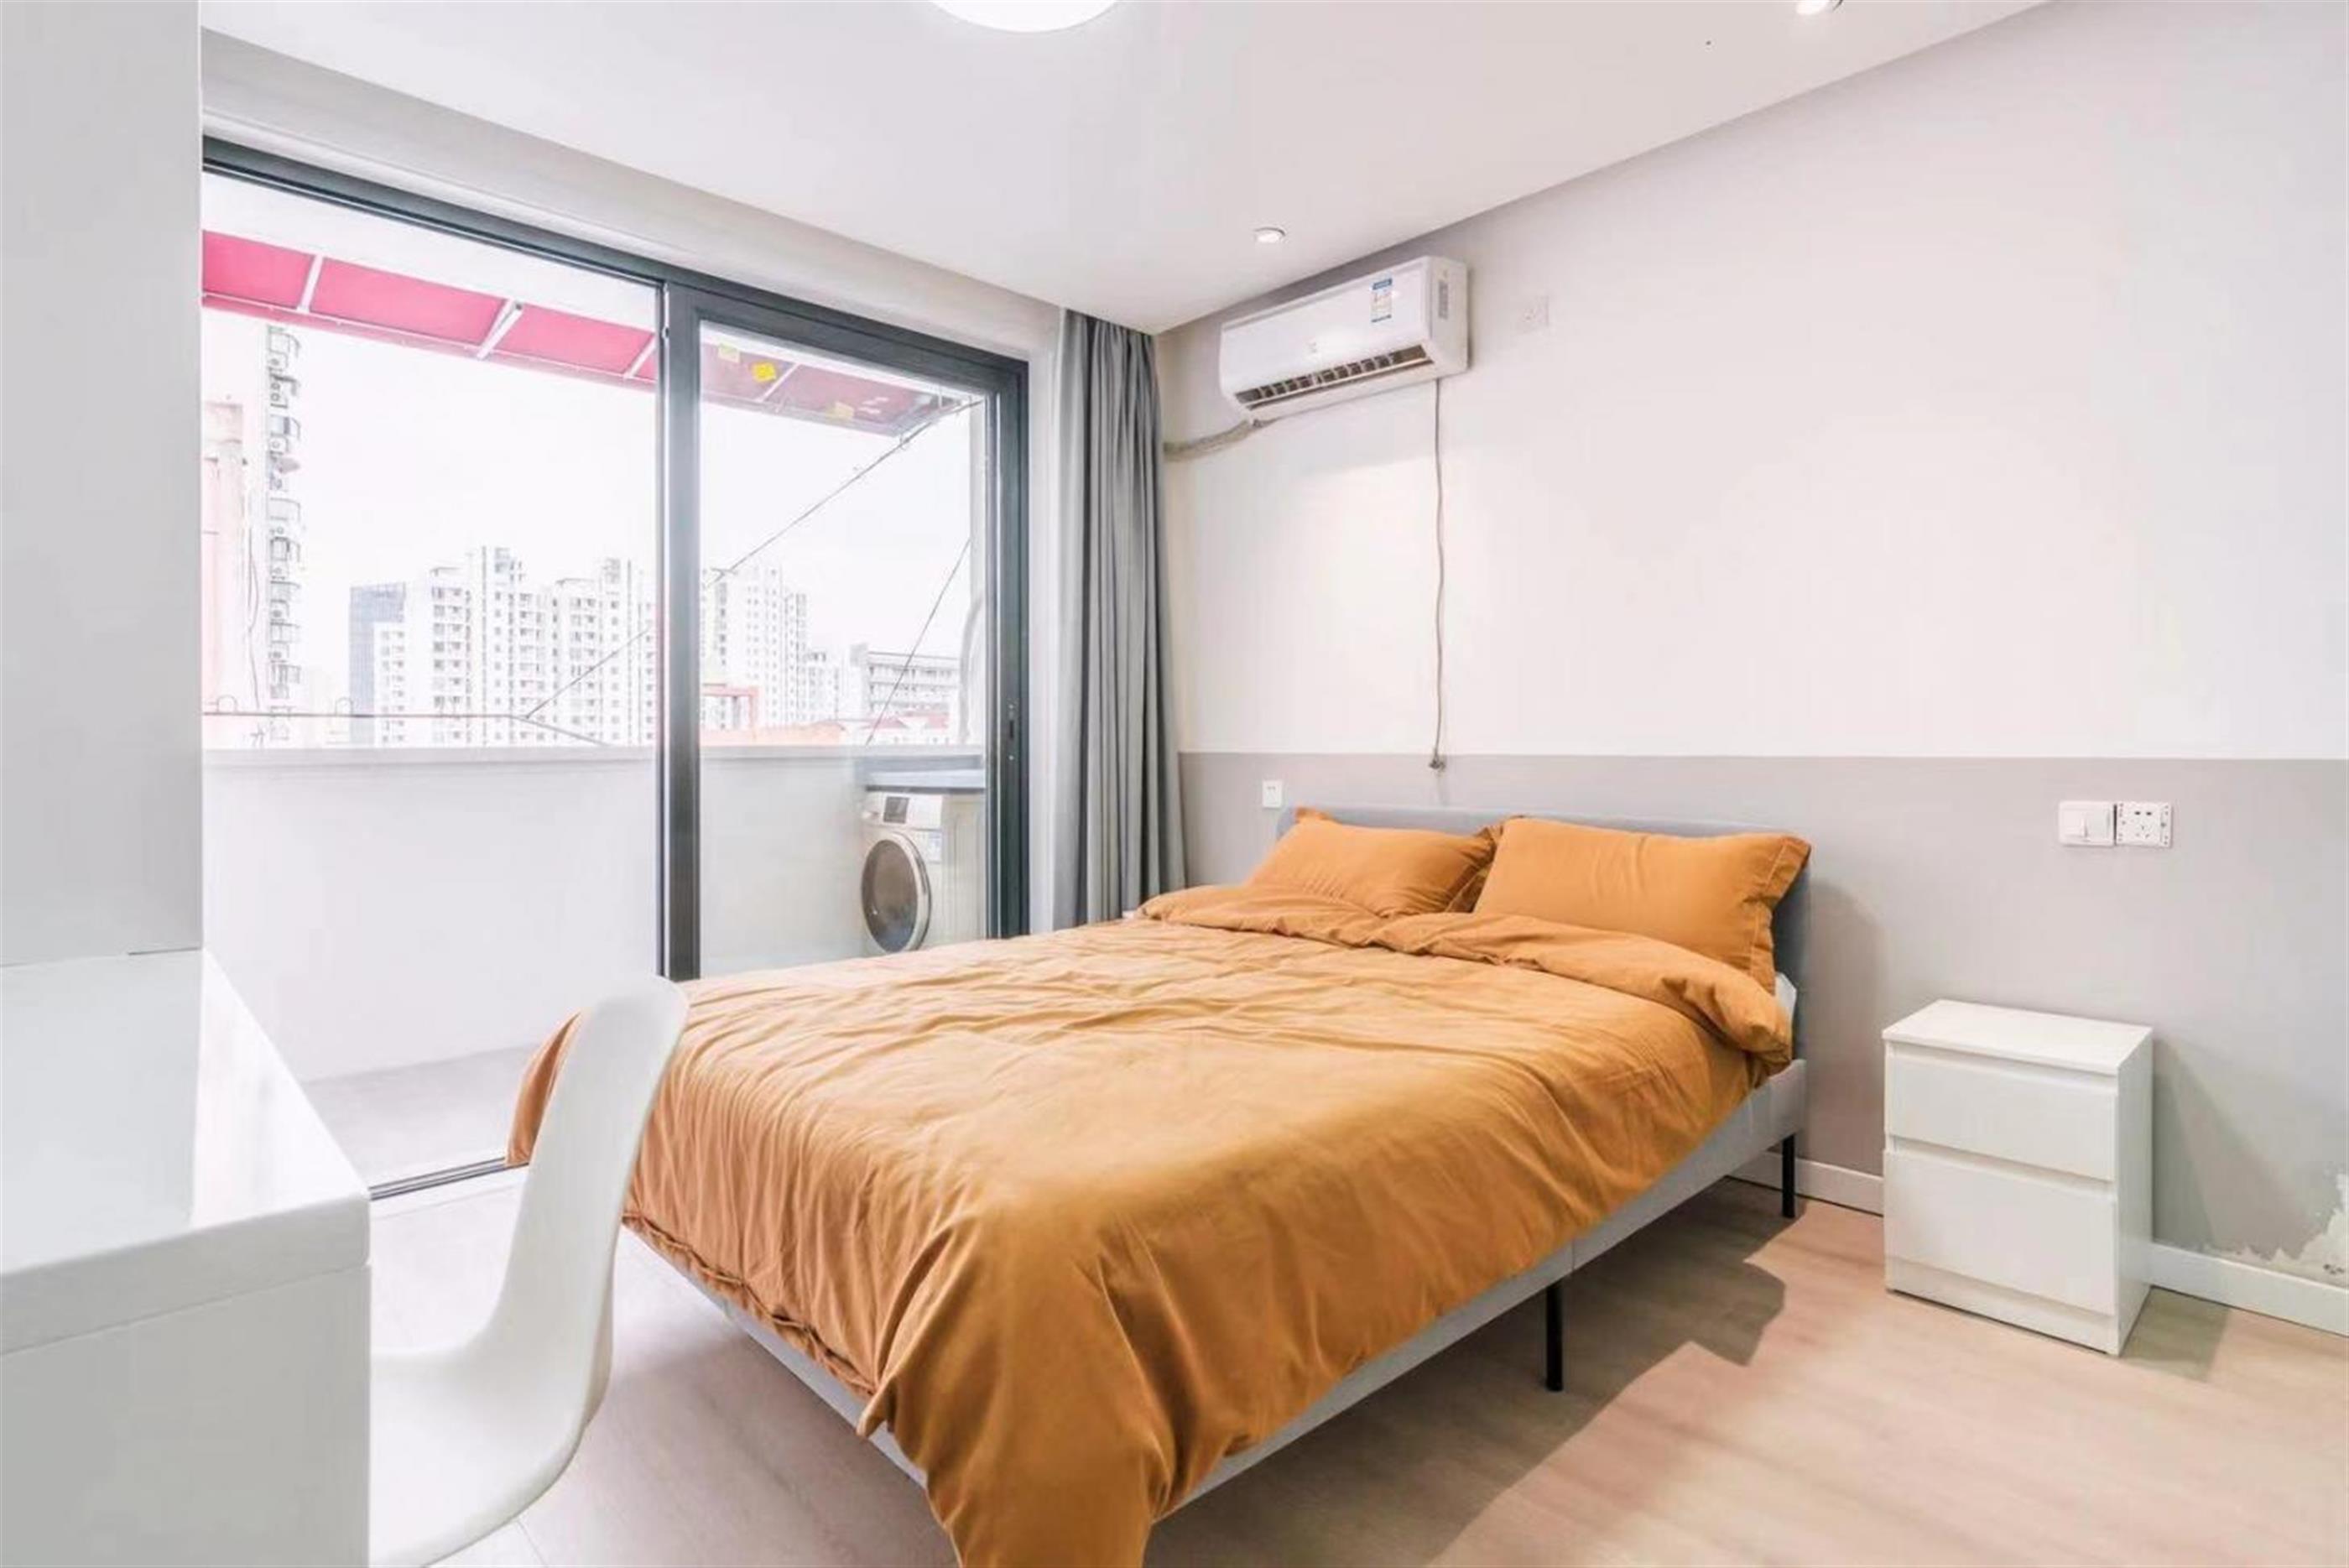 big room Renovated Bright Spacious 1BR Walk-up Apt Nr LN 3/4 for Rent in Shanghai